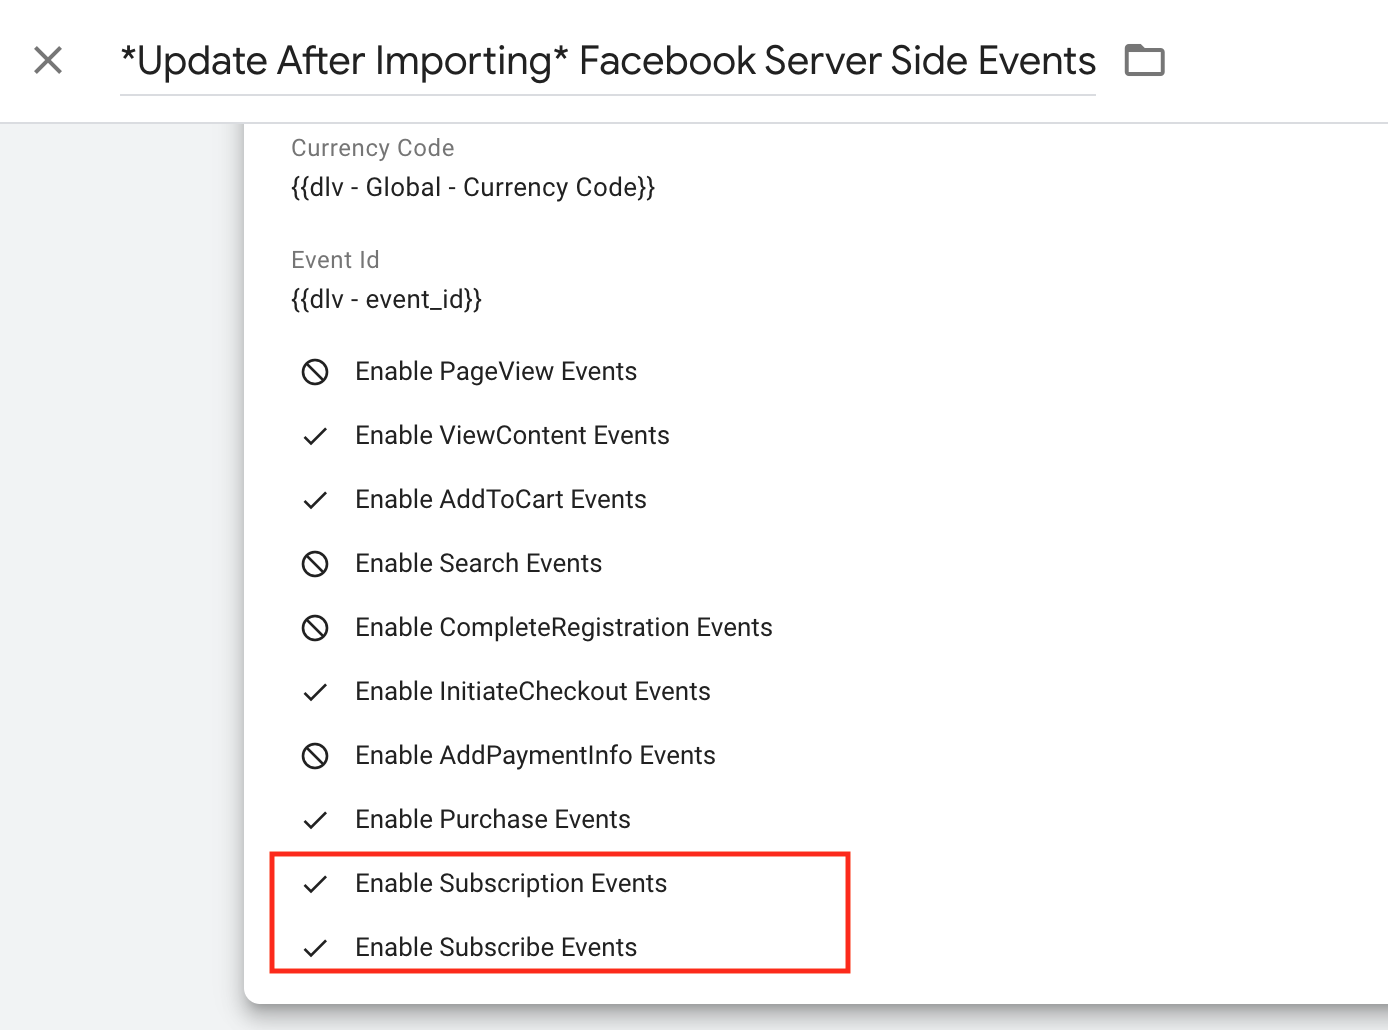 enable-subscription-events